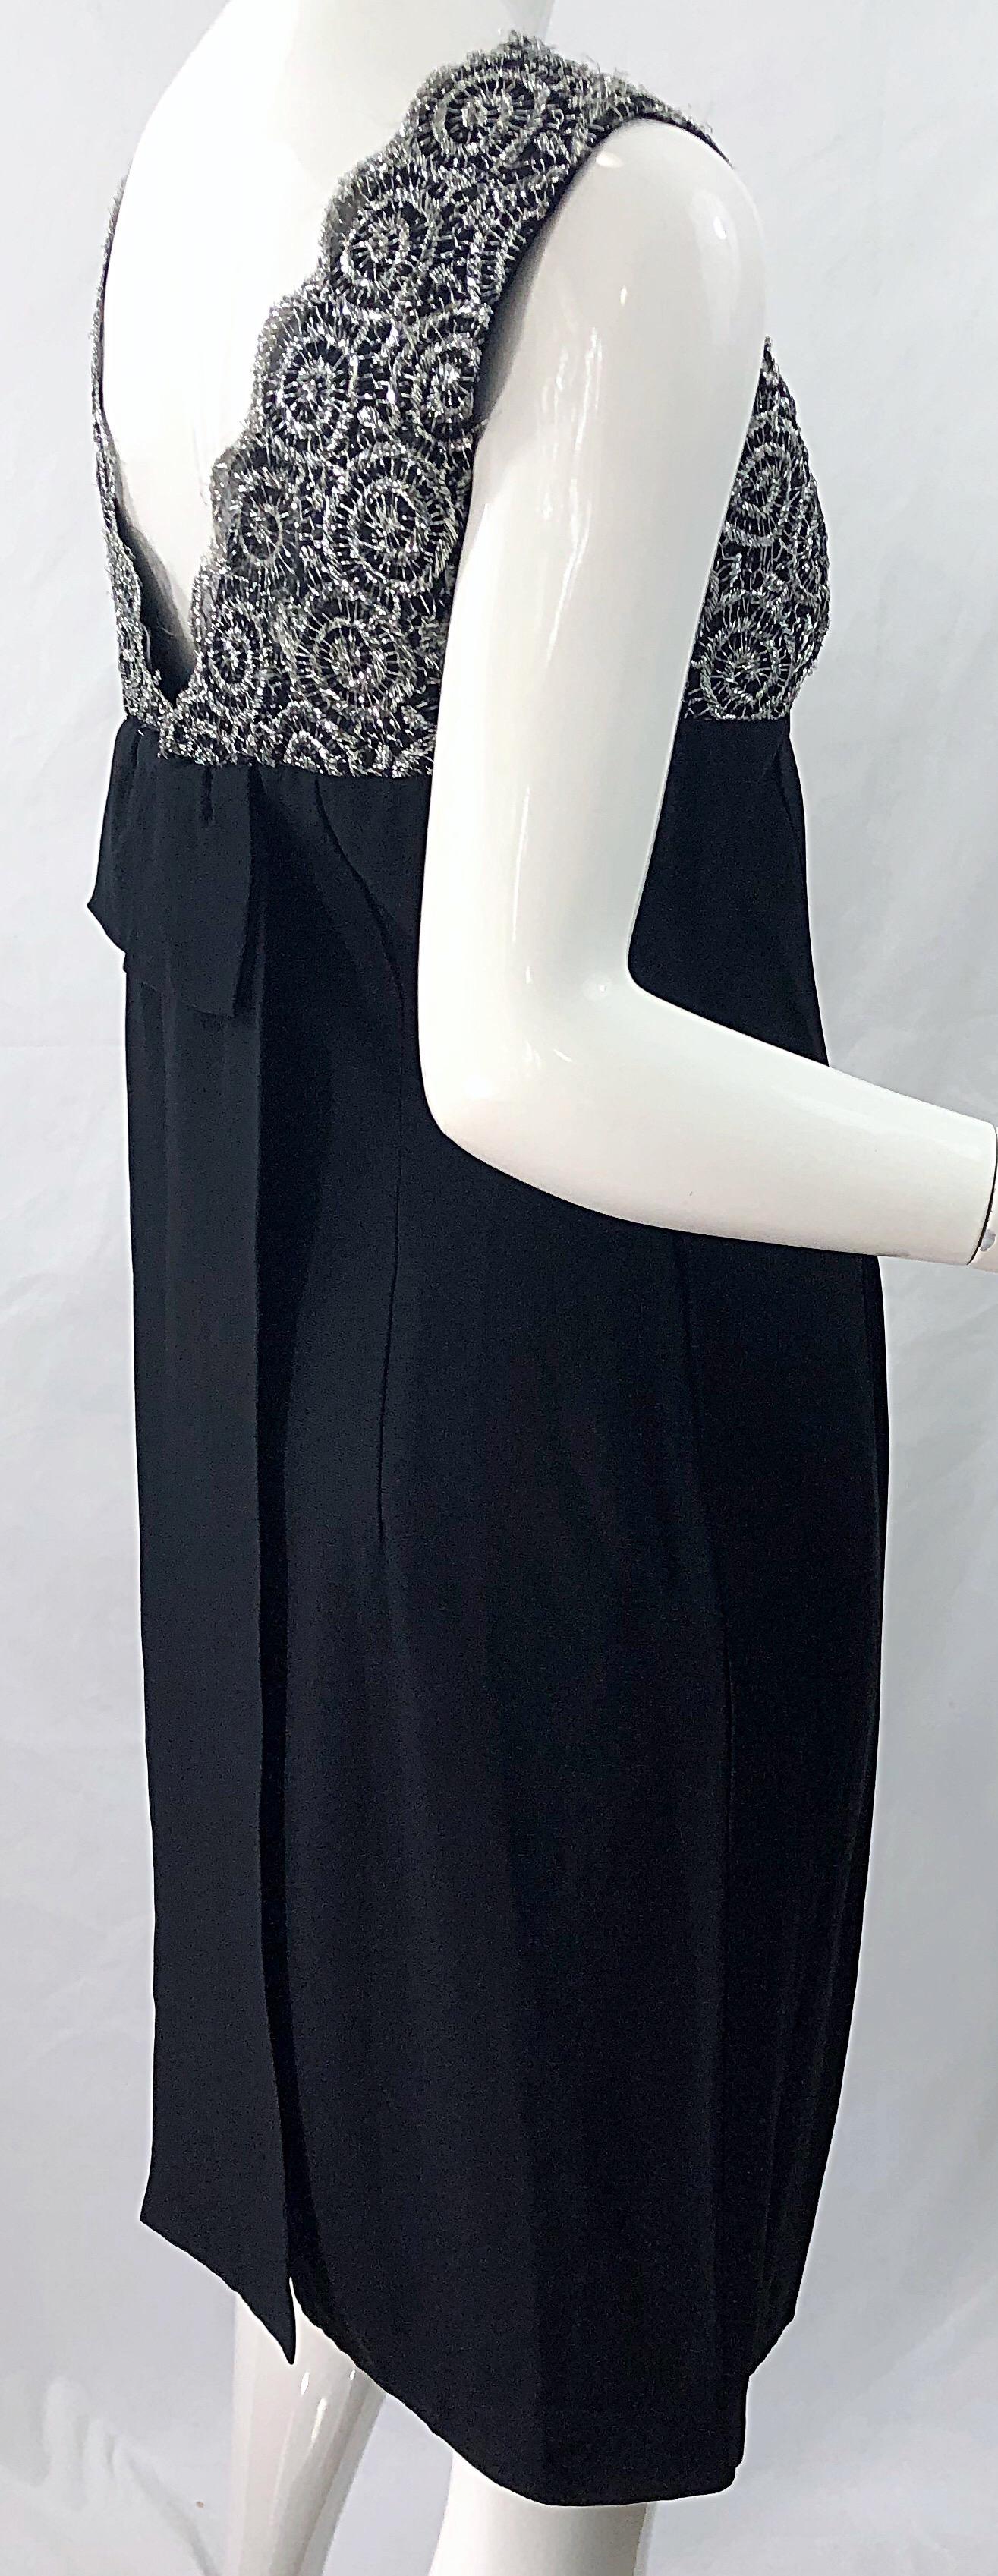 Chic 1960s Black and Silver Metallic Lace Rayon Crepe Vintage 60s Sheath Dress For Sale 3